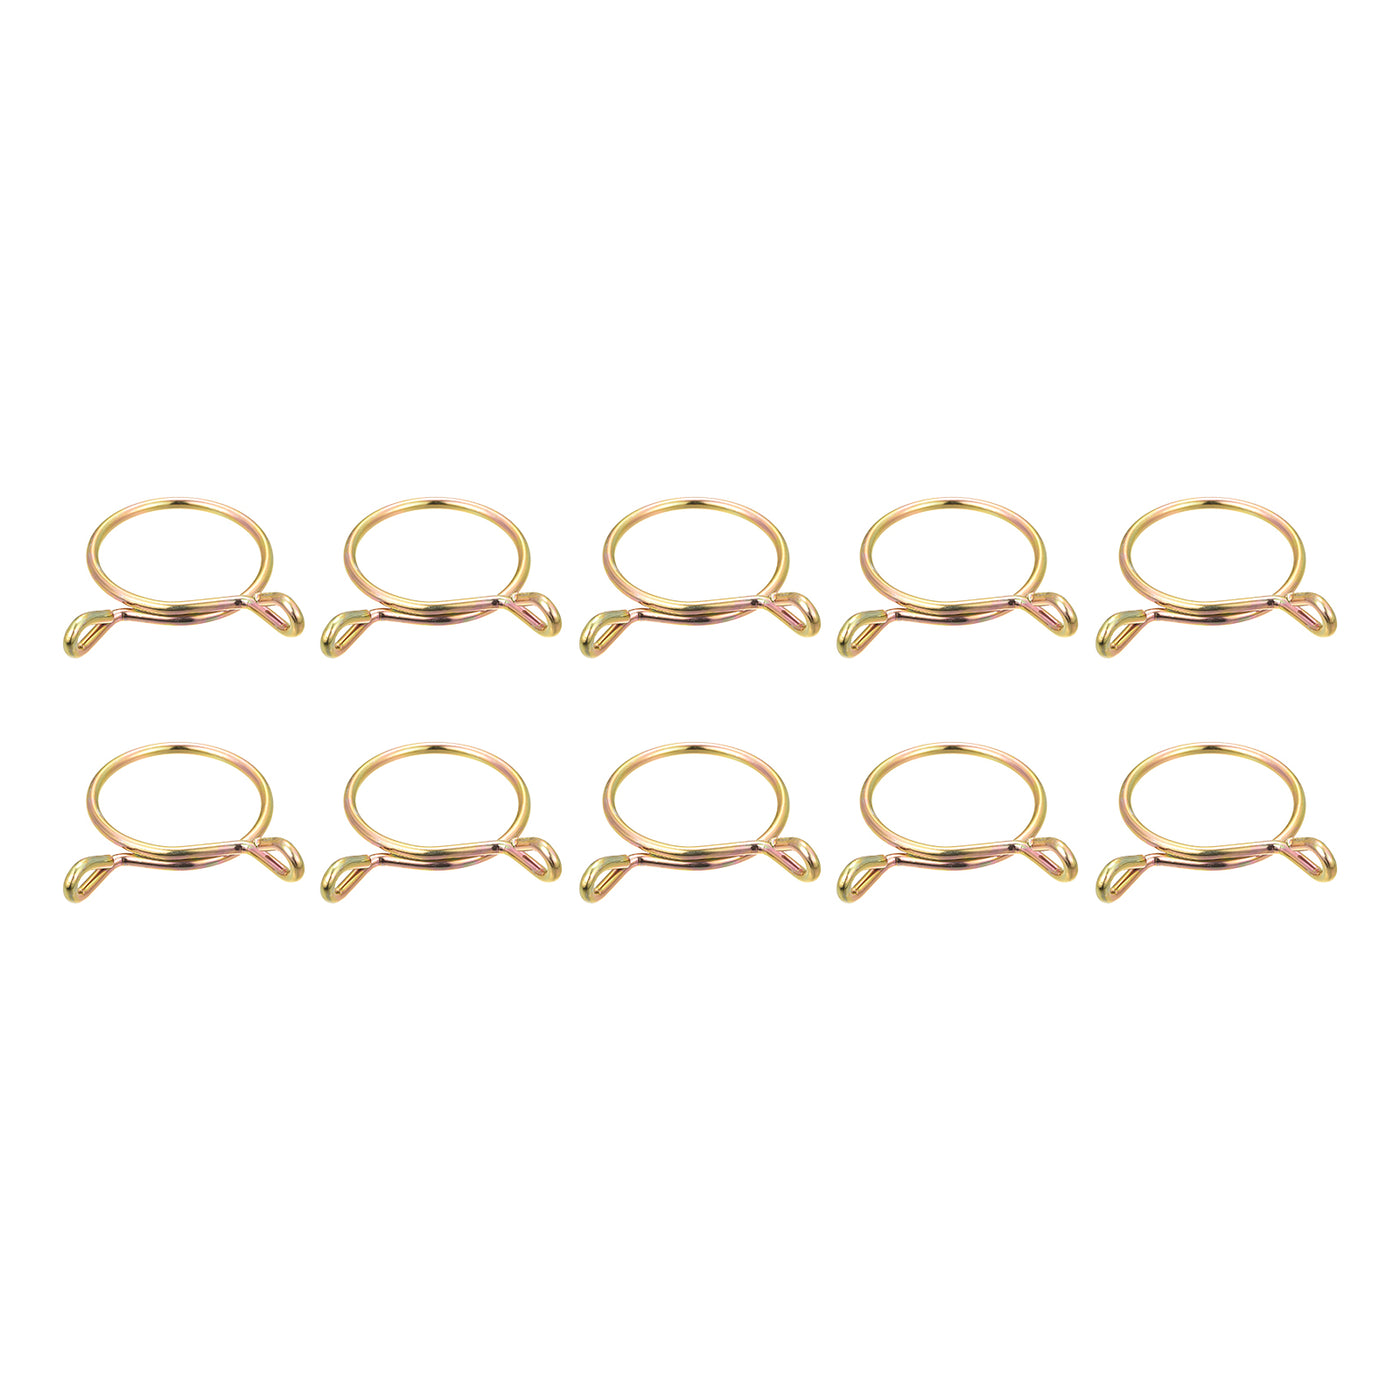 Uxcell Uxcell Fuel Line Hose Clips, 10pcs 60mm 65Mn Steel Tubing Spring Clamps